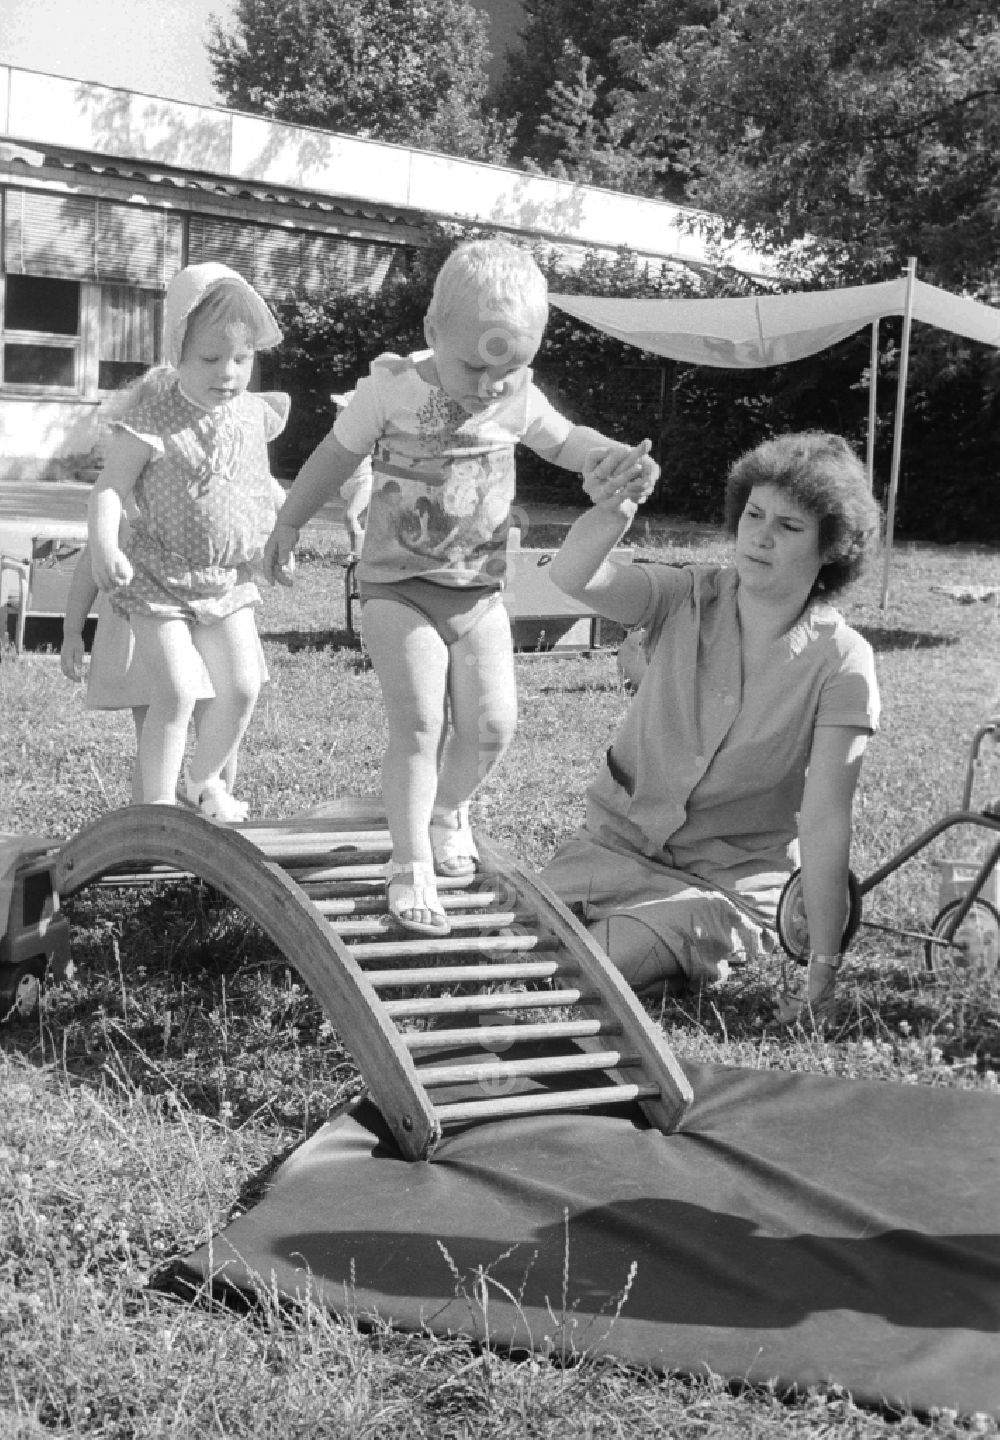 Berlin: Children play together with her educator in the garden and do gymnastics about a wooden rung curve in Berlin, the former capital of the GDR, German democratic republic